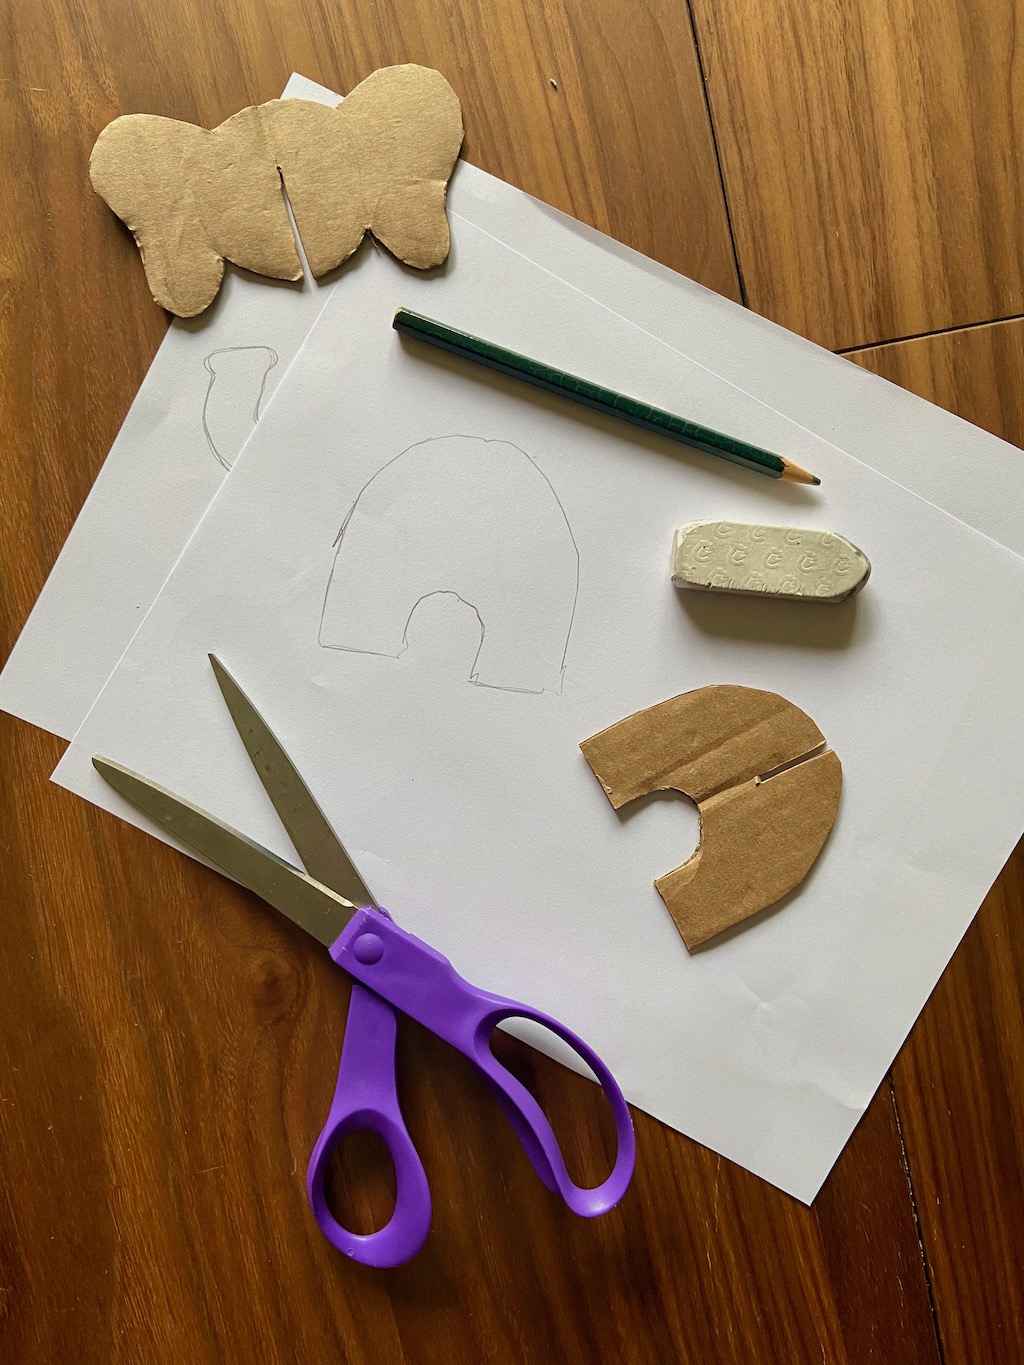 Draw the shape of a pair of legs for the elephant. You will make 2 of these pieces.